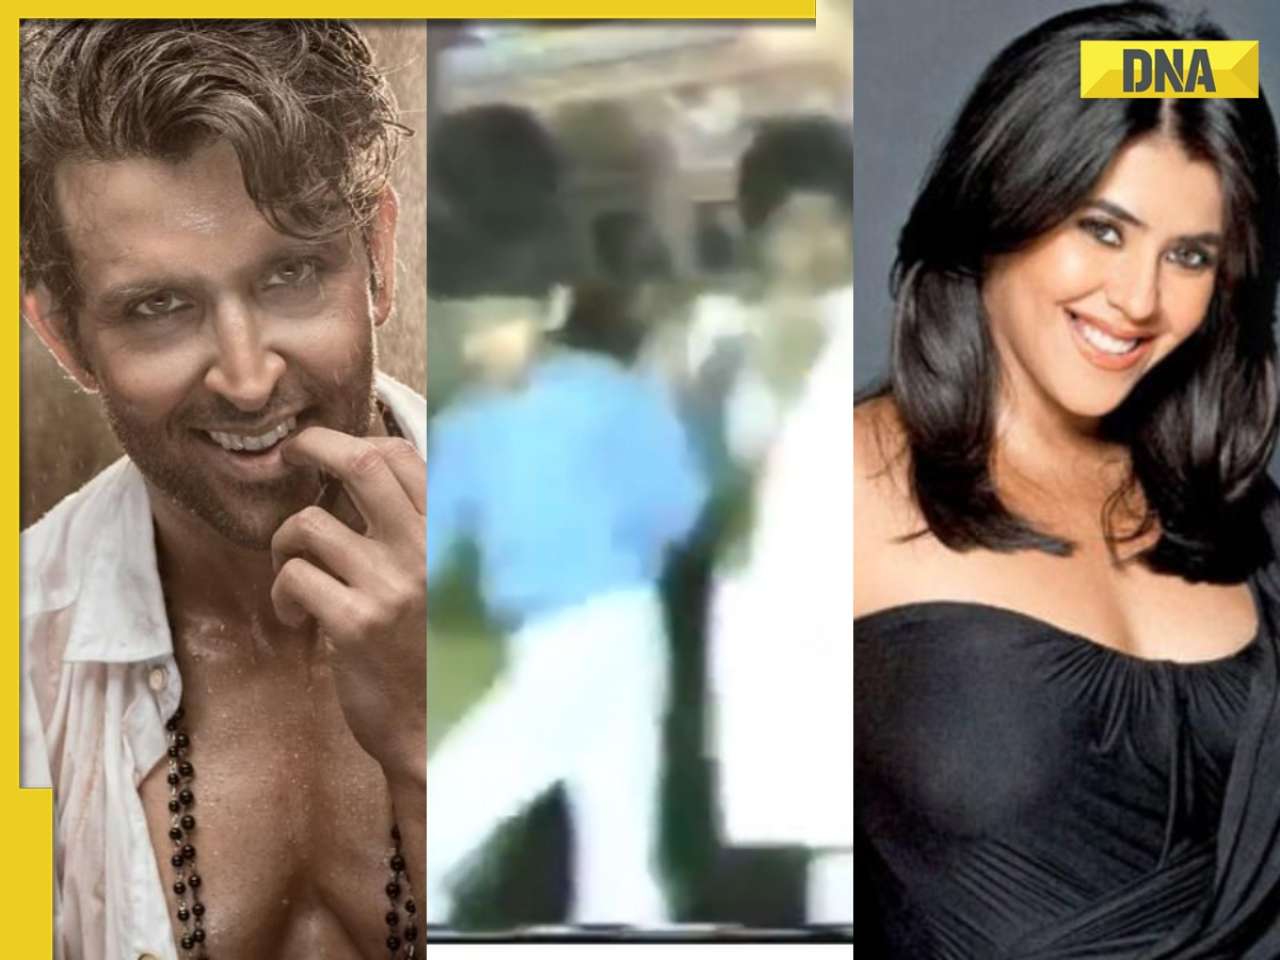 'Killing it': Hrithik Roshan, Ekta Kapoor show off dance moves in throwback viral video from their childhood, fans react